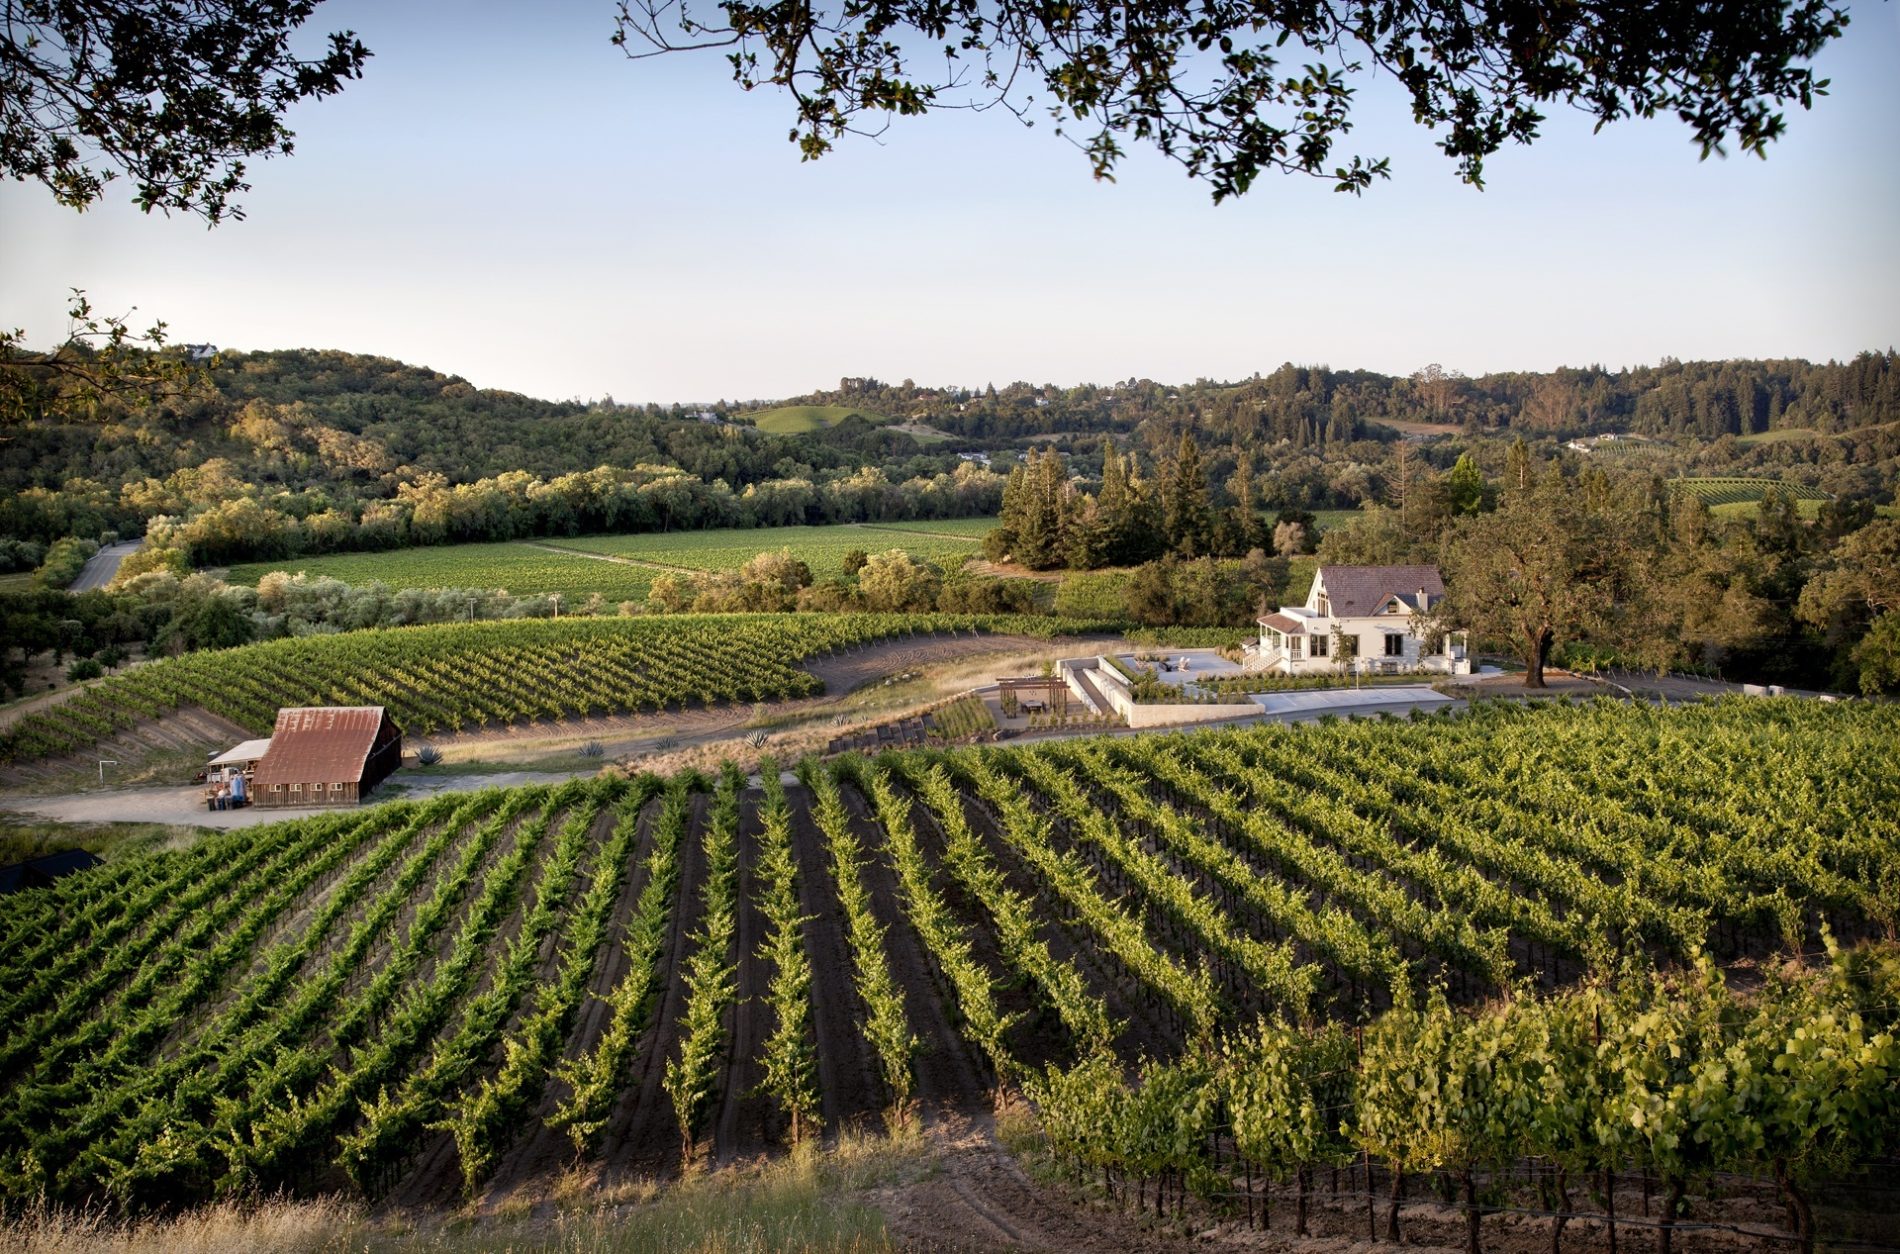 a scenic image of vineyards on a evening afternoon with sight of the road house and barn